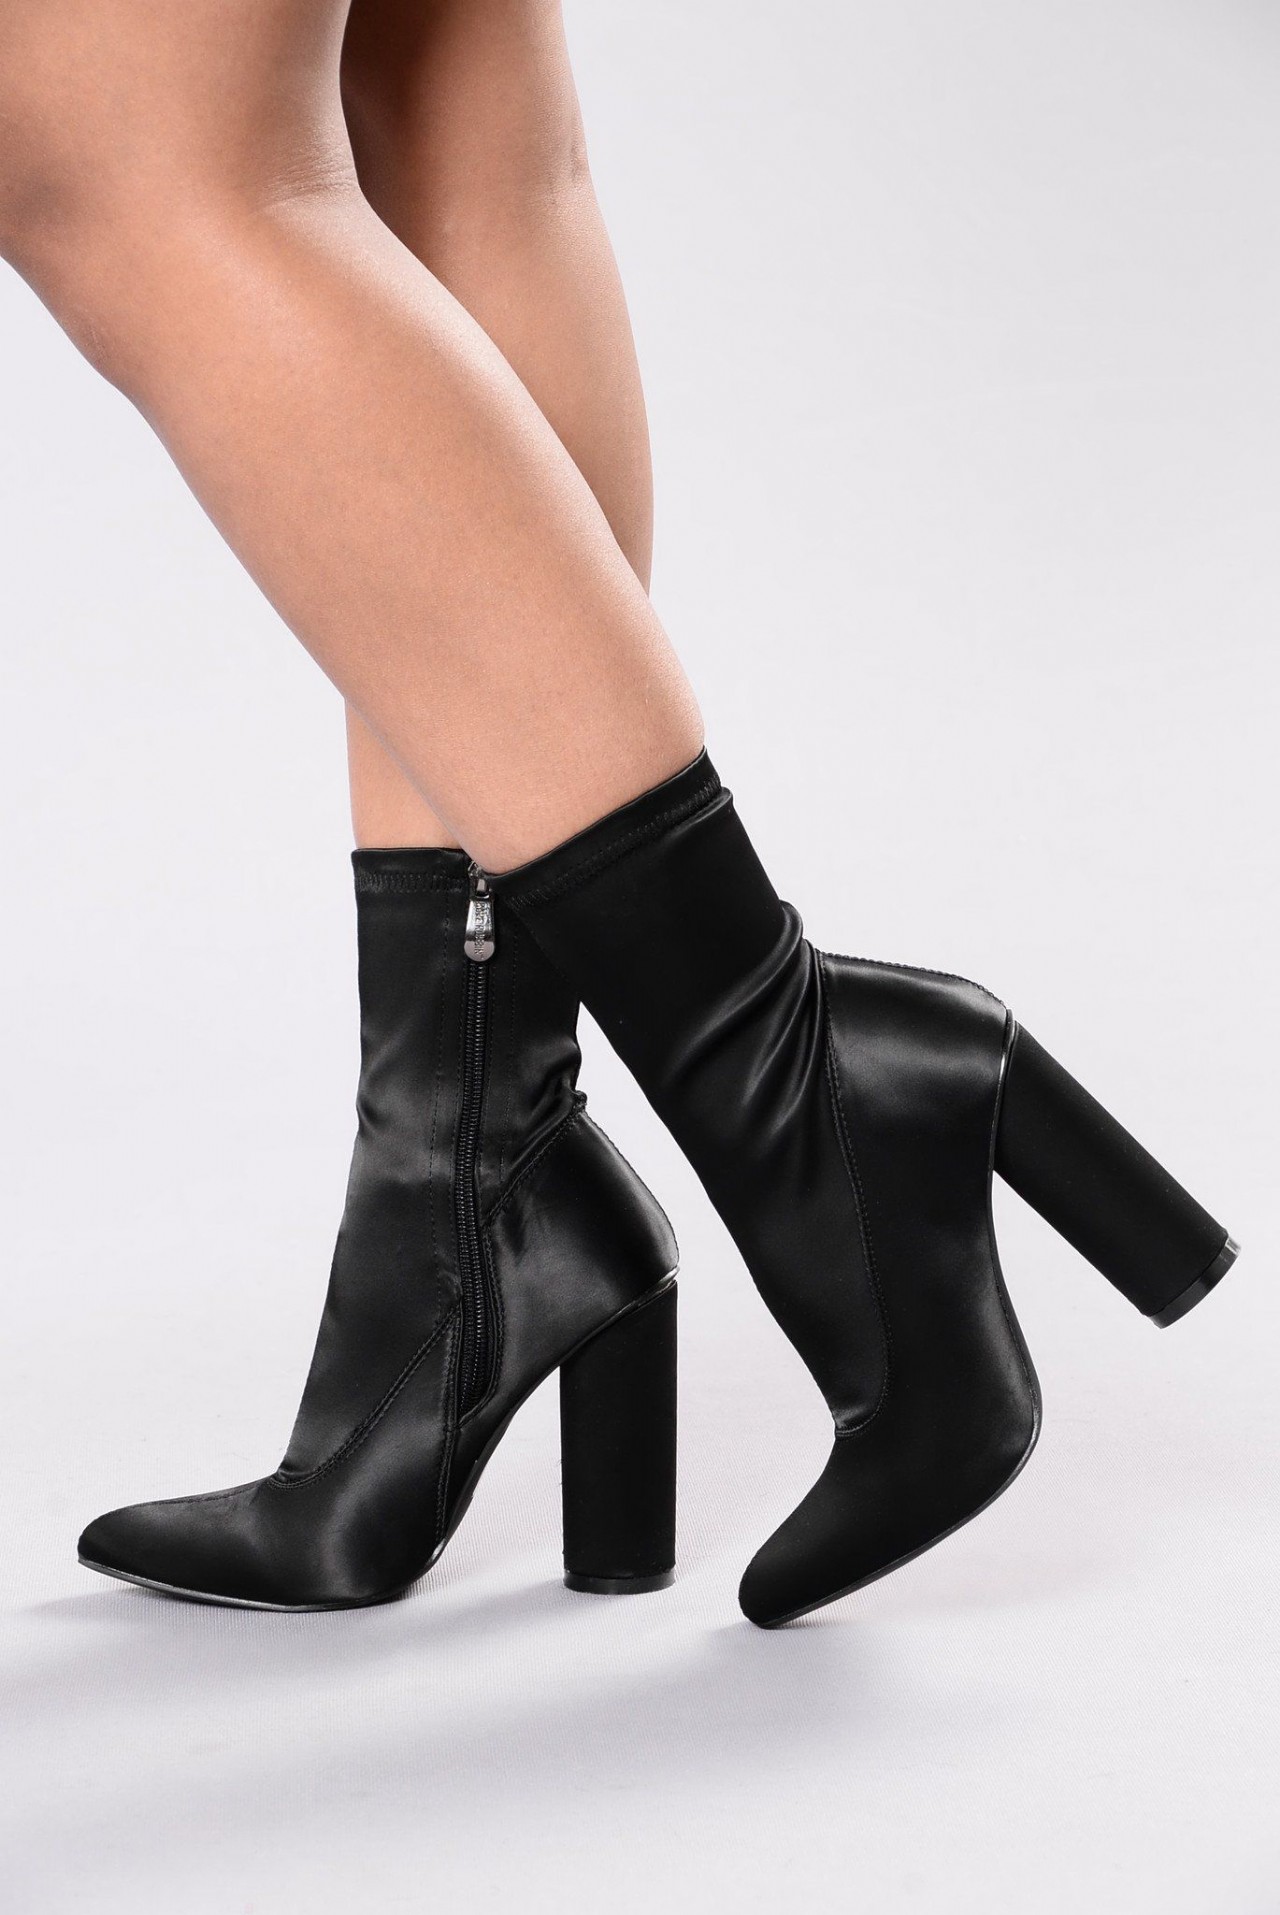 High heels black leather winter boots for women